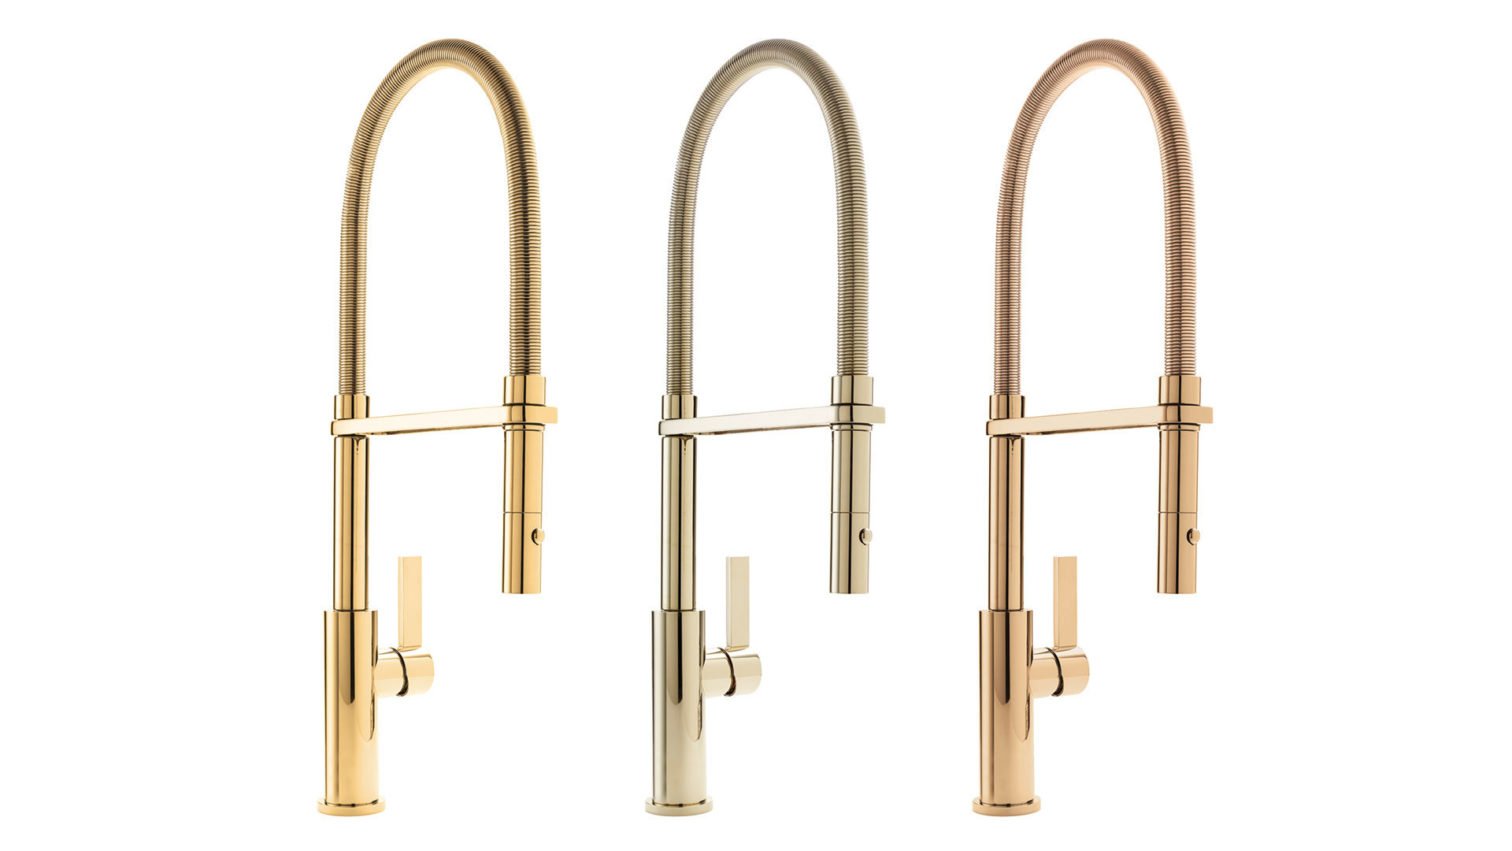 Kitchen Culinary faucets in polished gold brass and nickel